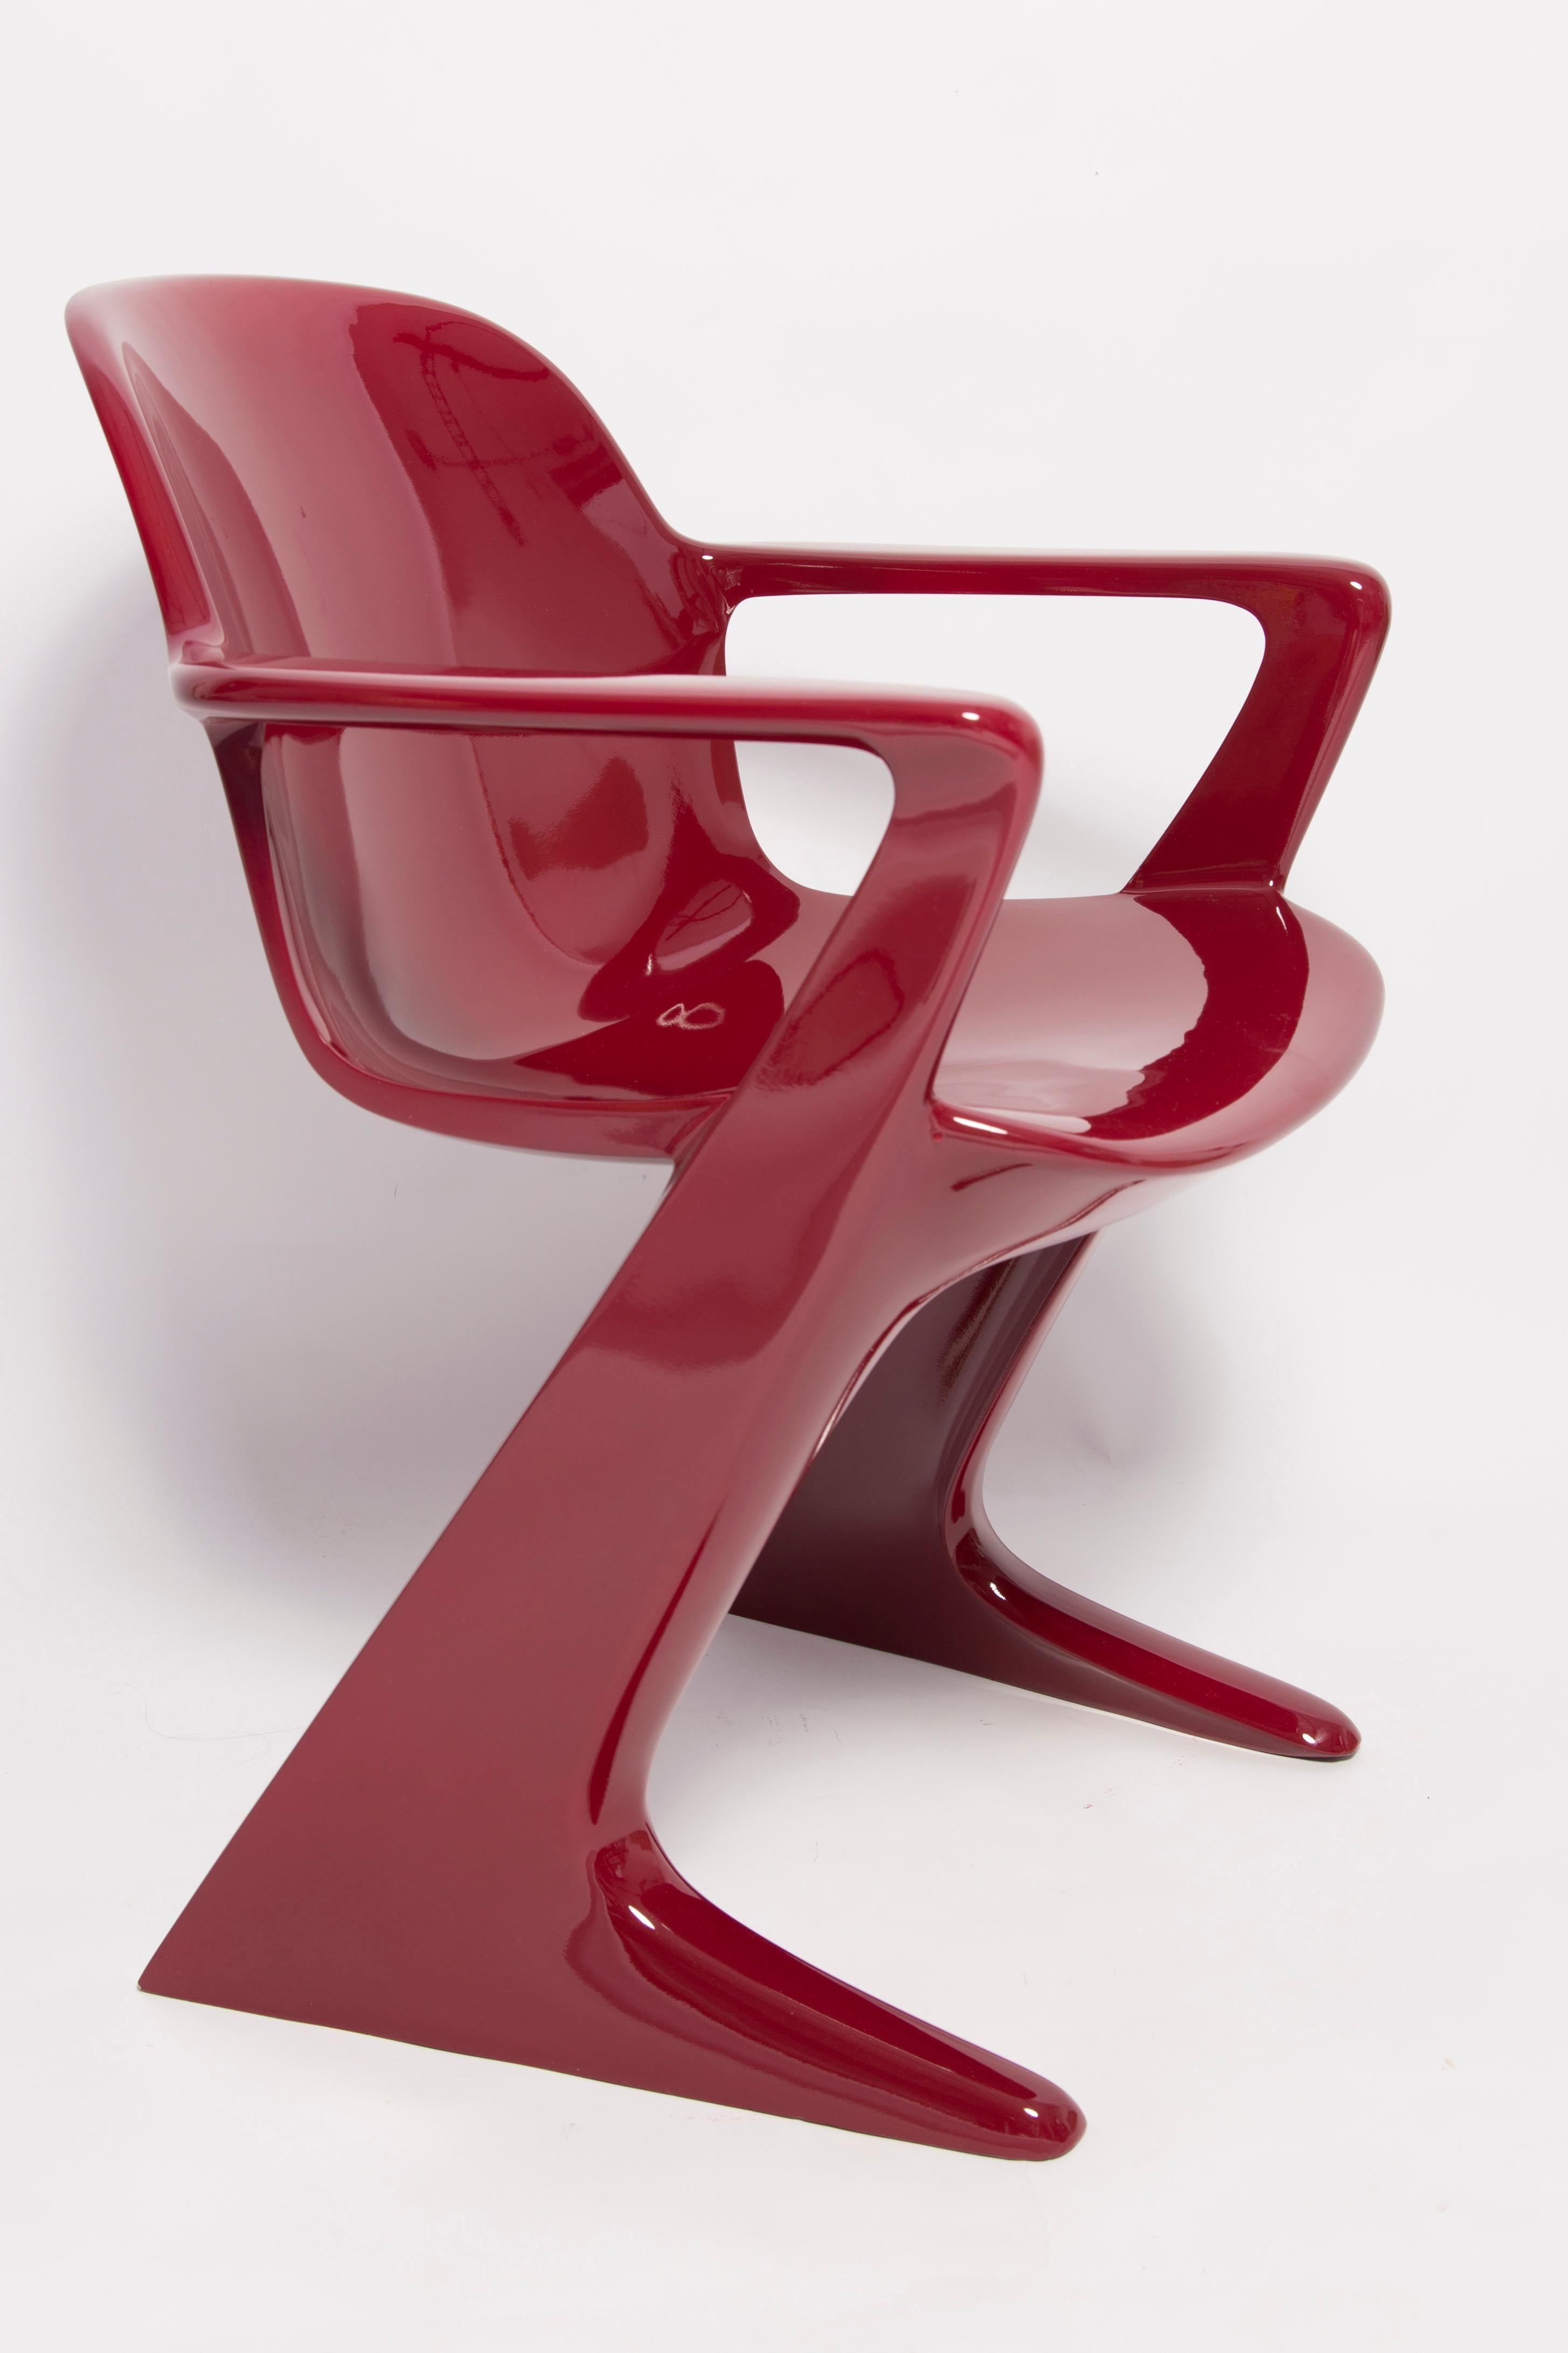 This model is called Z-chair. Designed in 1968 in the GDR by Ernst Moeckl and Siegfried Mehl, German Version of the Panton chair. Also called kangaroo chair or variopur chair. Produced in eastern Germany.

Chair is after full renovation, glossy